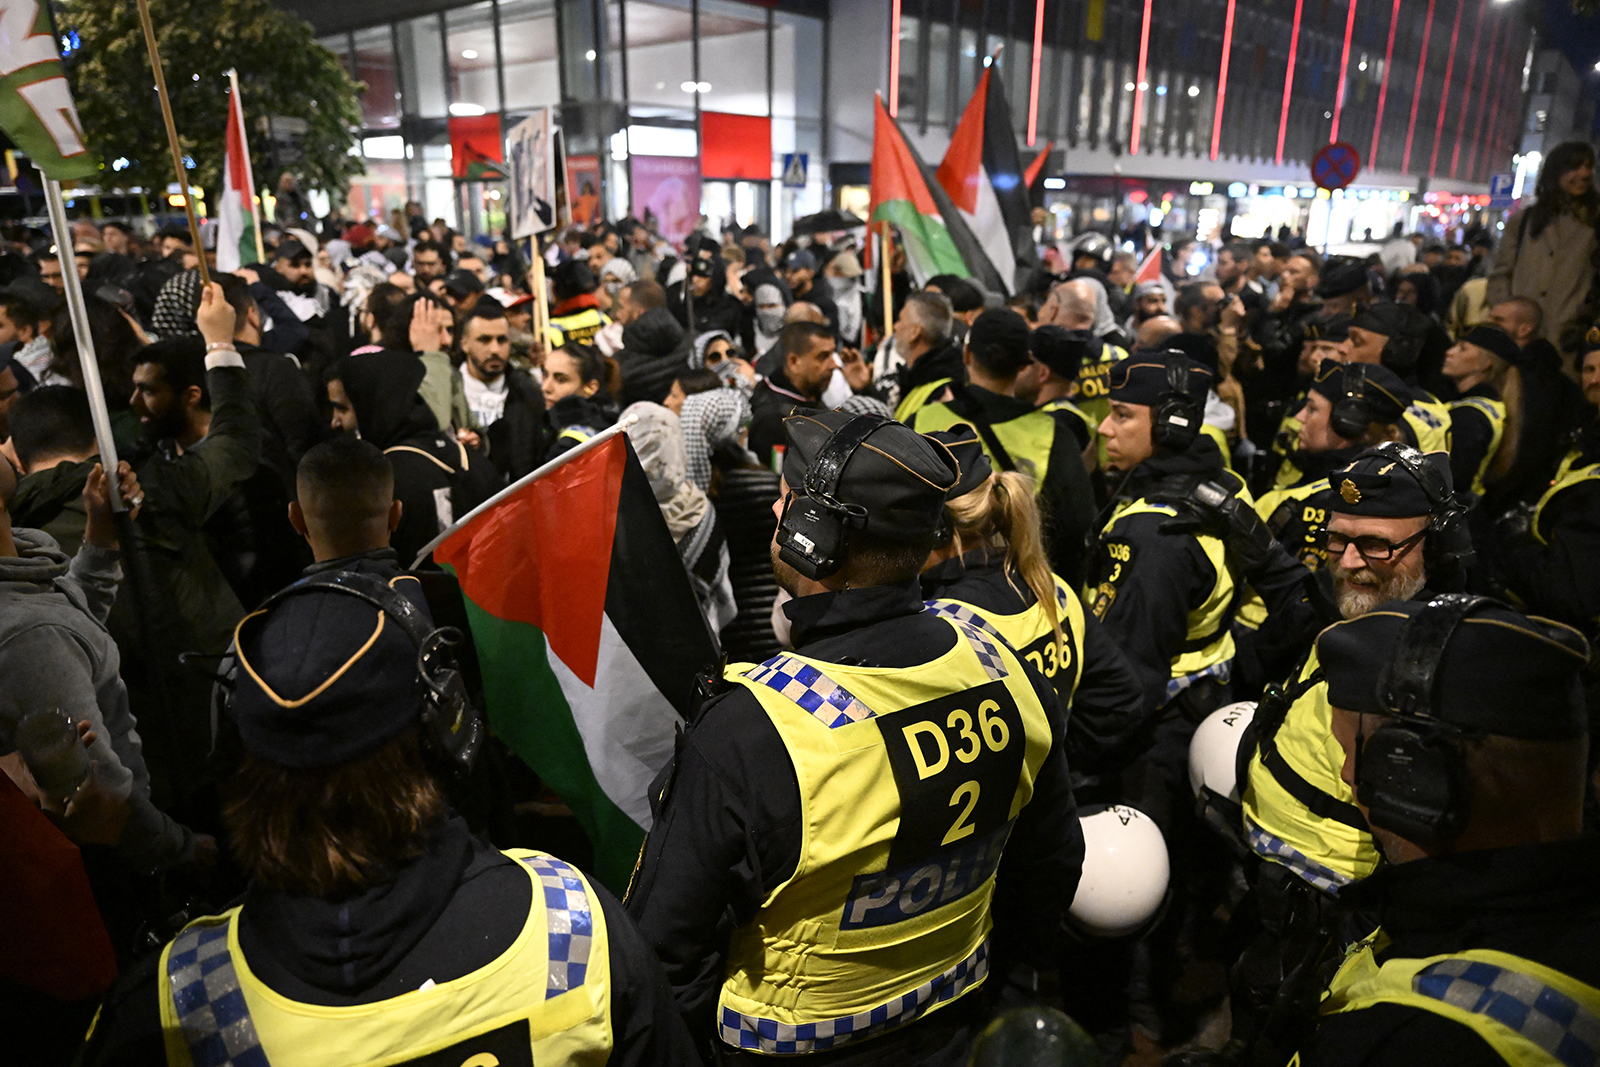 Police face pro-Palestinian protesters in central Malmo during the 68th edition of the Eurovision Song Contest (ESC) in Malmo Arena, Sweden, on May 9.